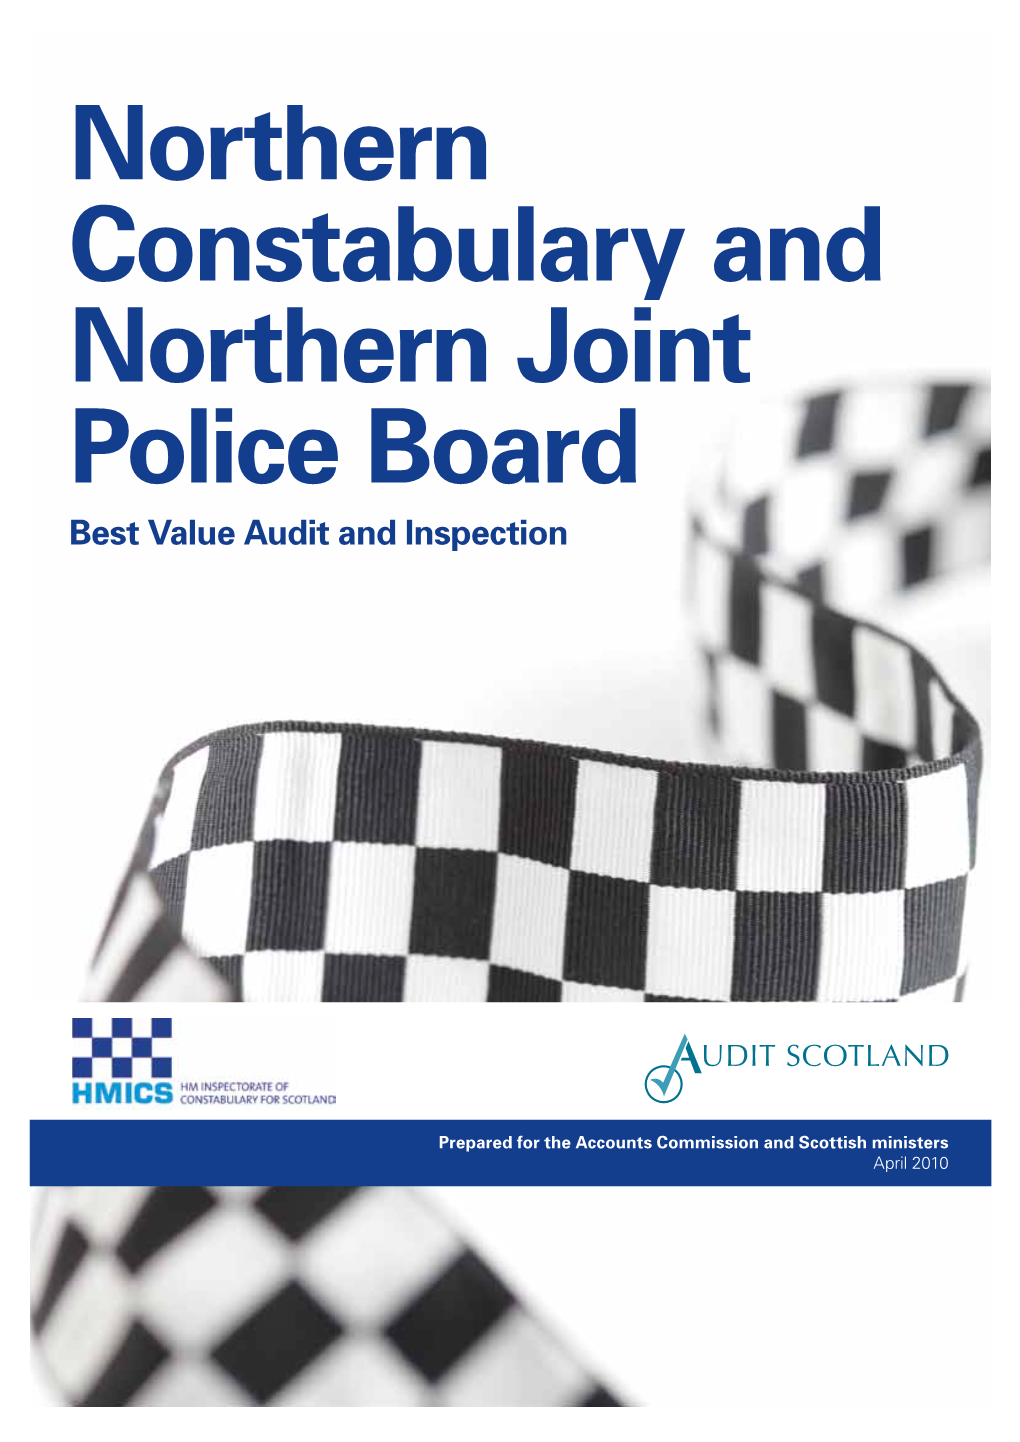 Northern Constabulary and Northern Joint Police Board Best Value Audit and Inspection